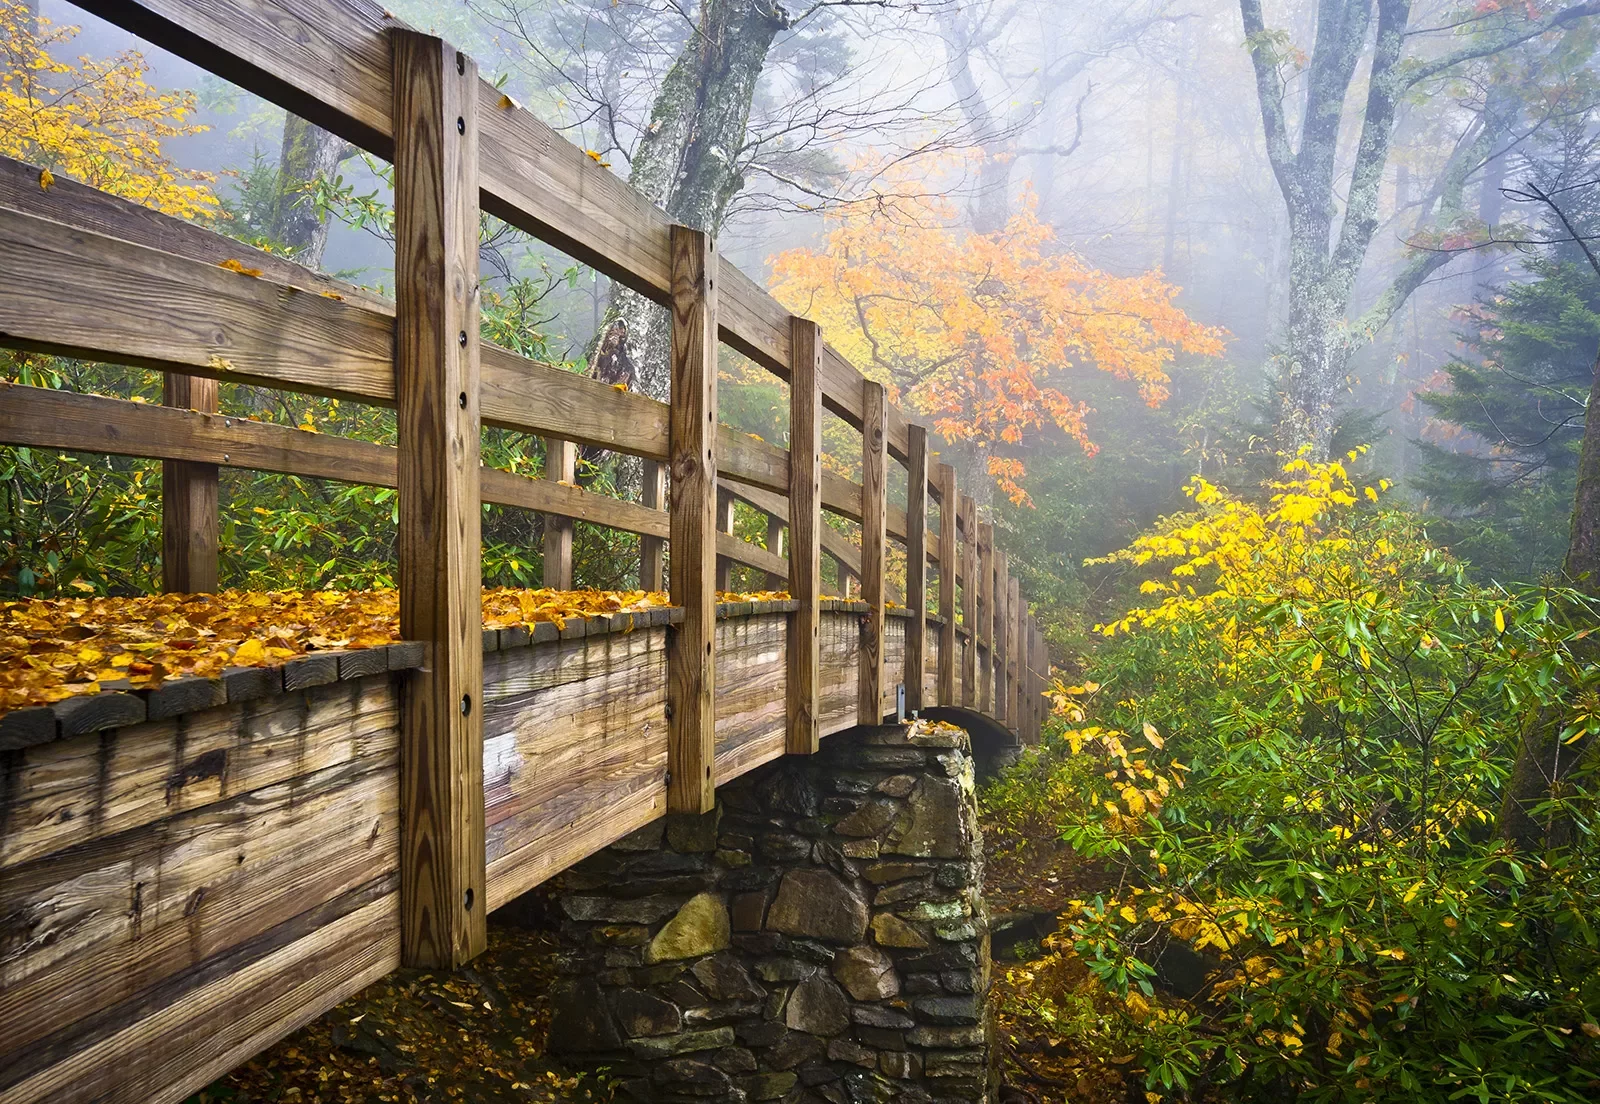 Shot of foggy forest, wooden bridge in foreground.